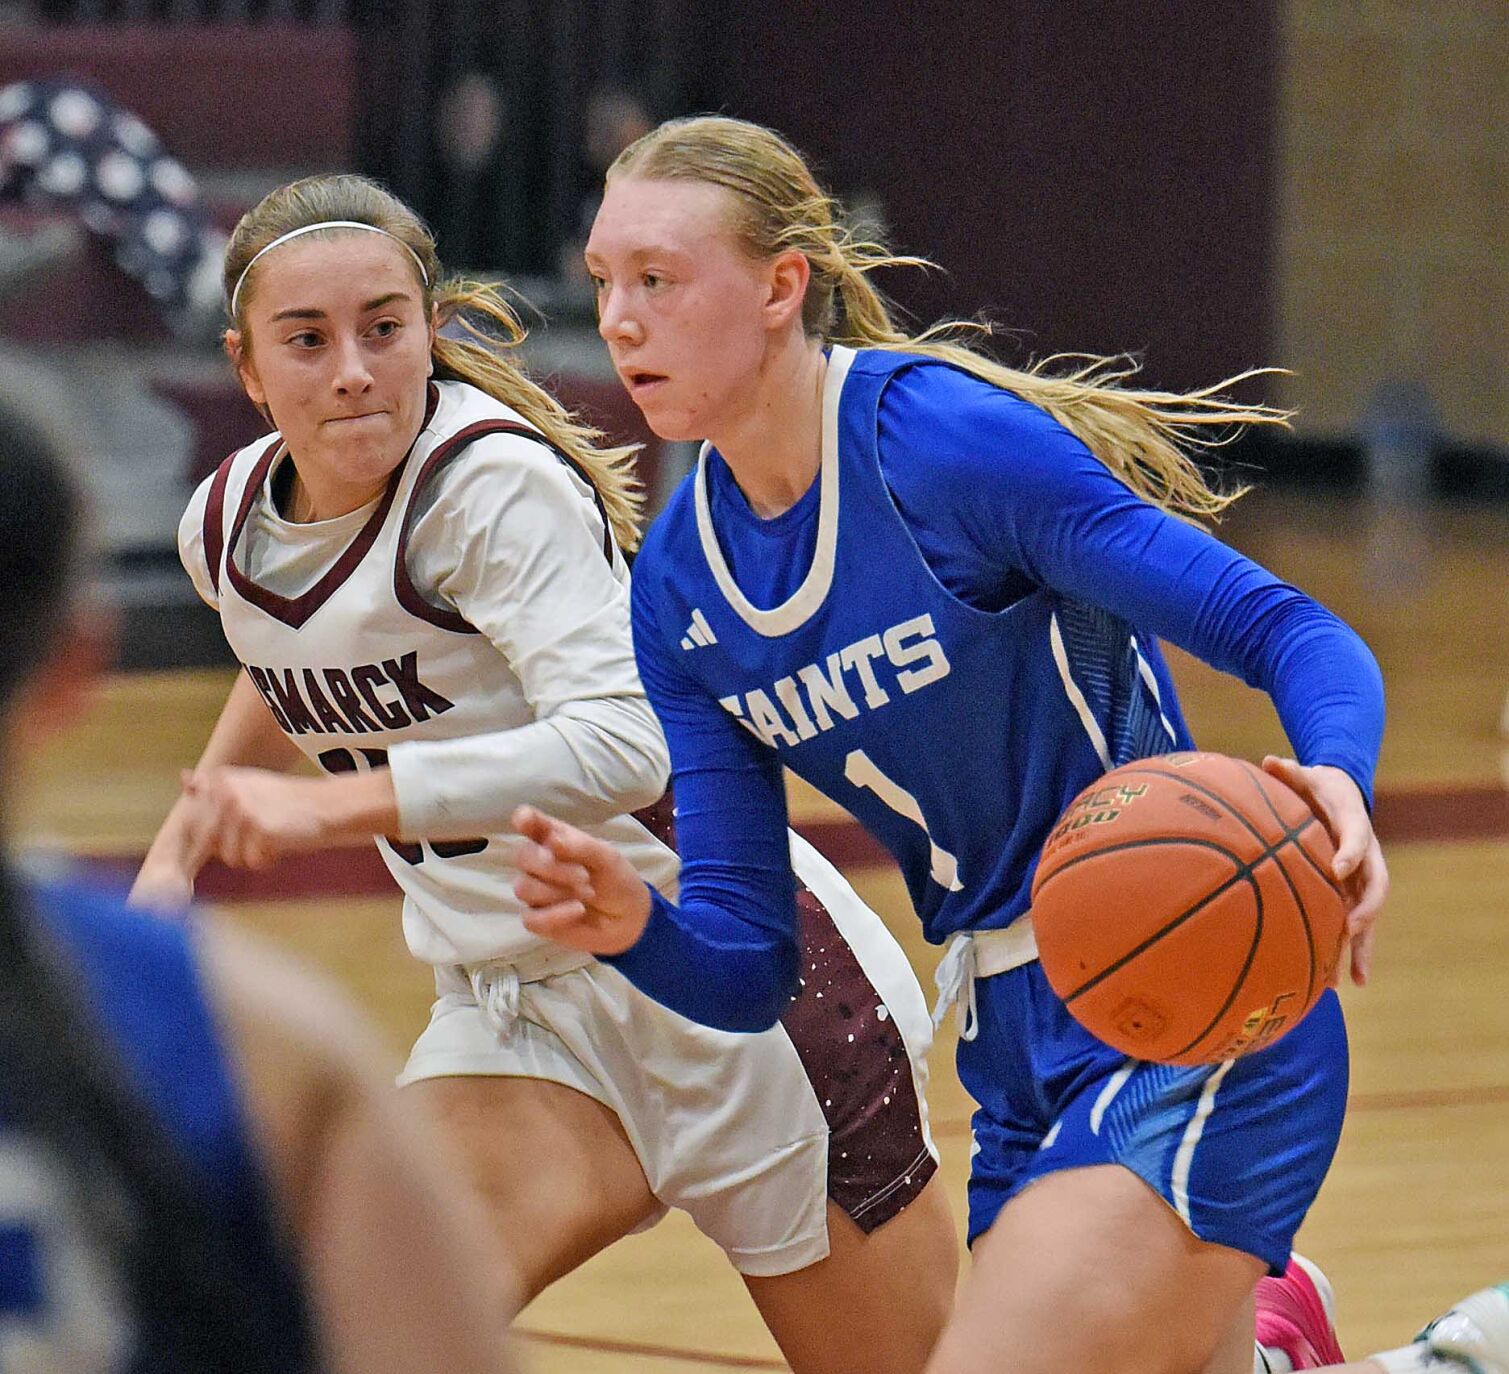 Bismarck Basketball Teams Close Conference Schedule with Victories – Paige Breuer Scores Game-High 26 Points